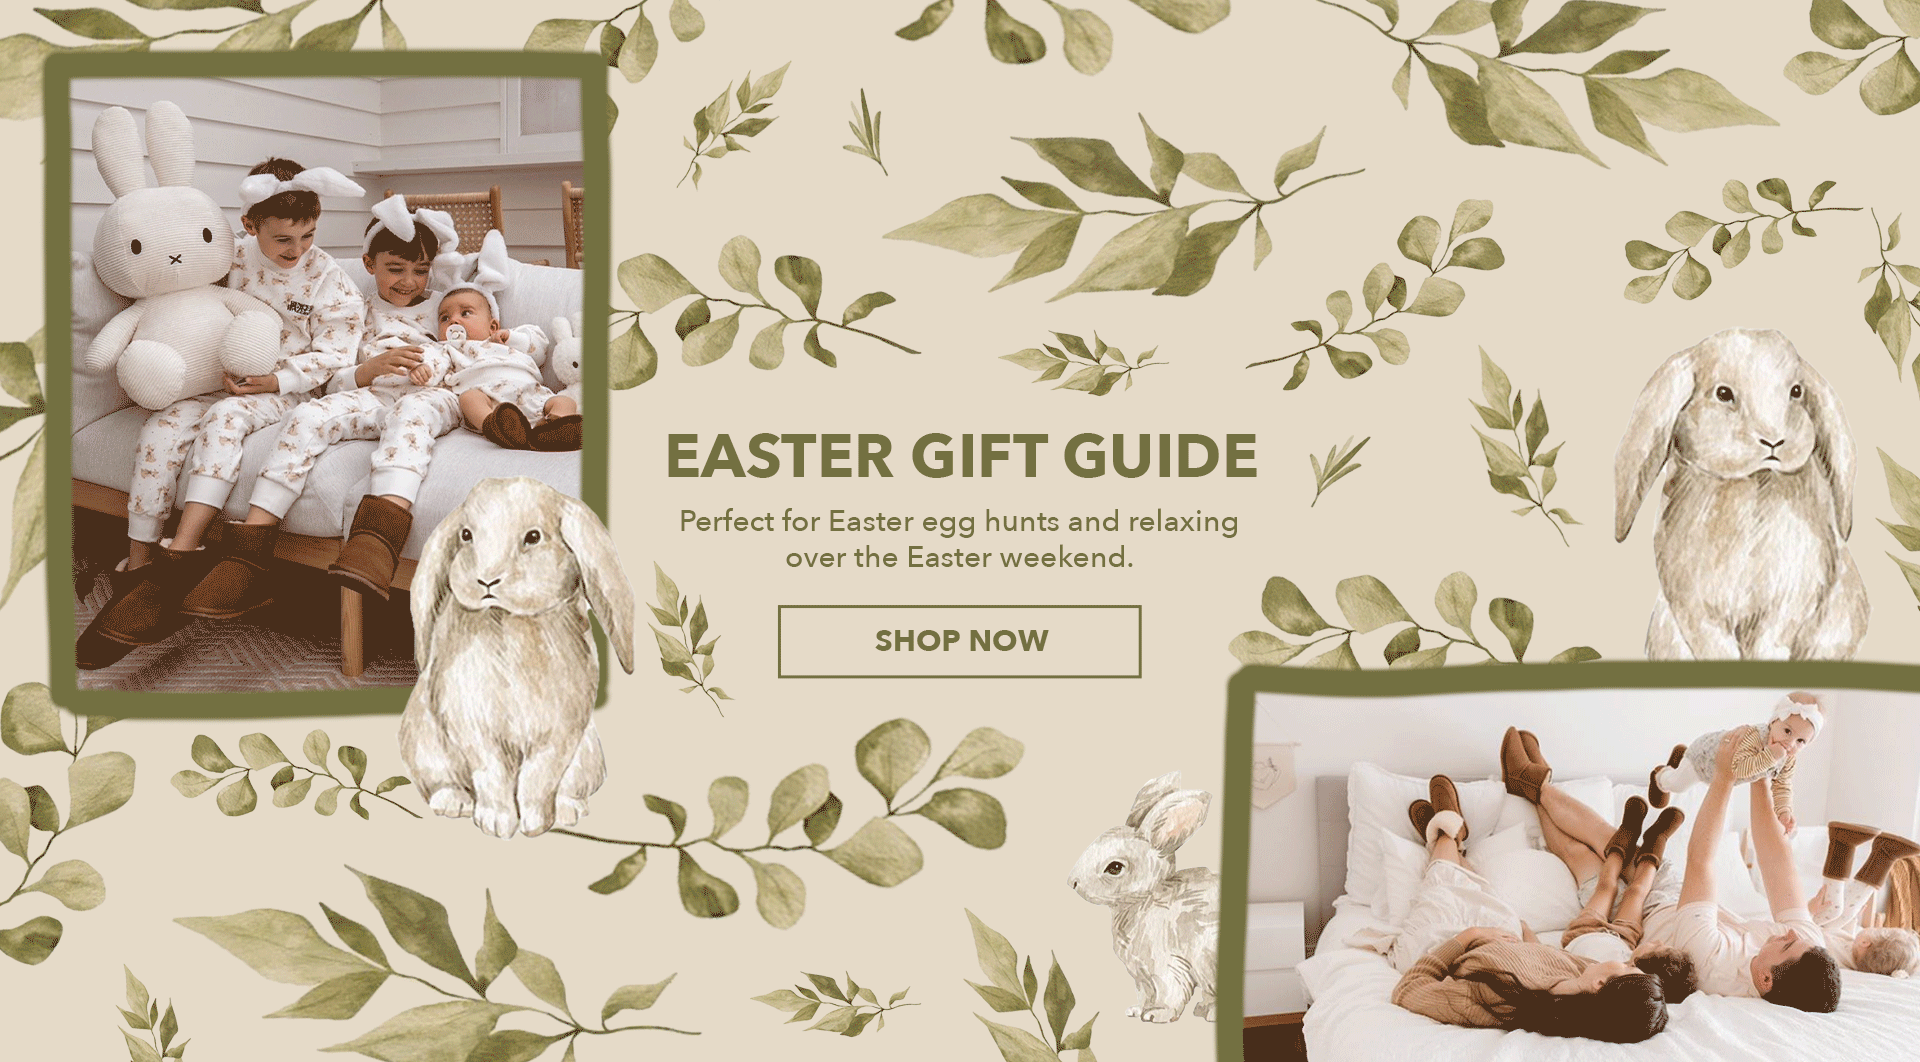 Watercolour Easter collage with easter bunnies and children wearing EMU sheepskin boots & slippers. Text reads: Easter Gift Guide. Shop Now.